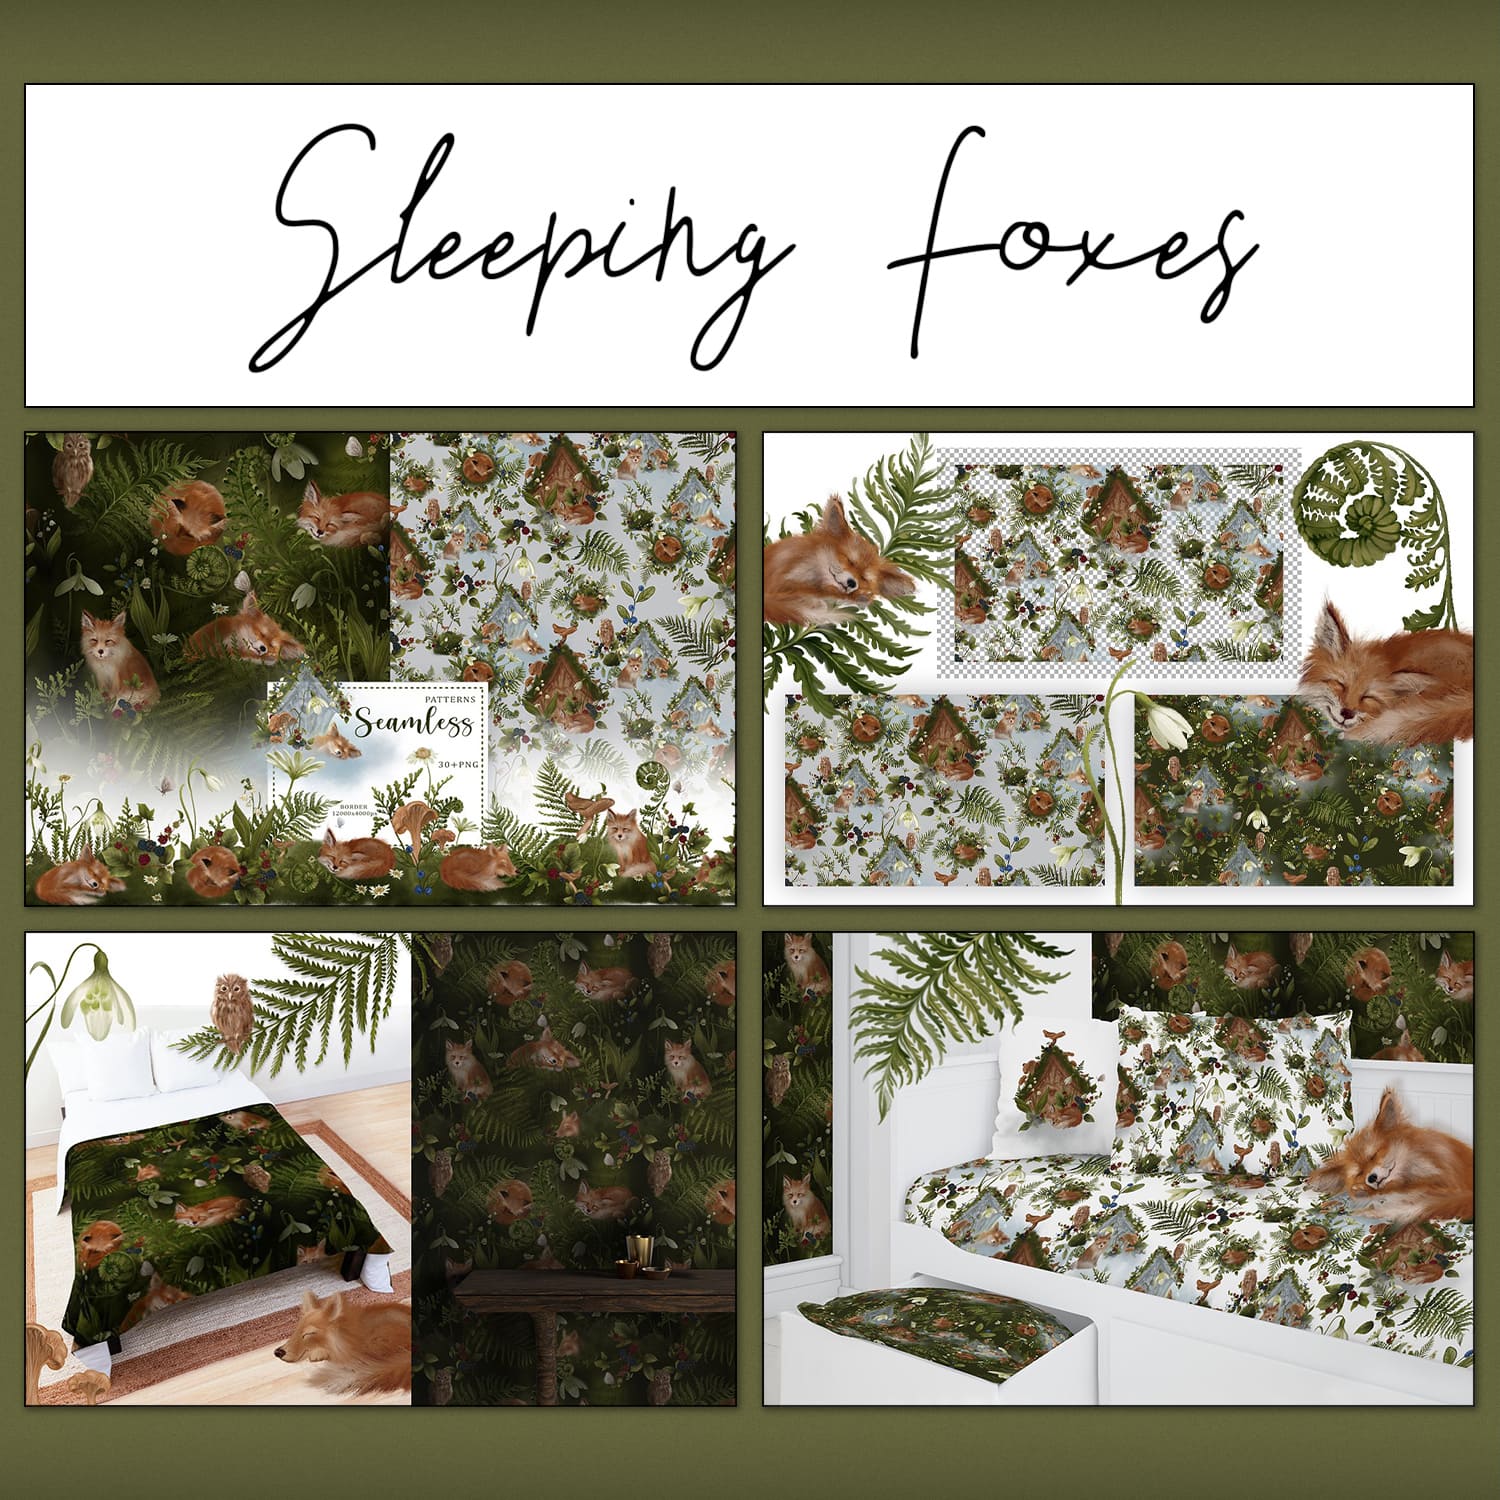 Sleeping foxes cover.